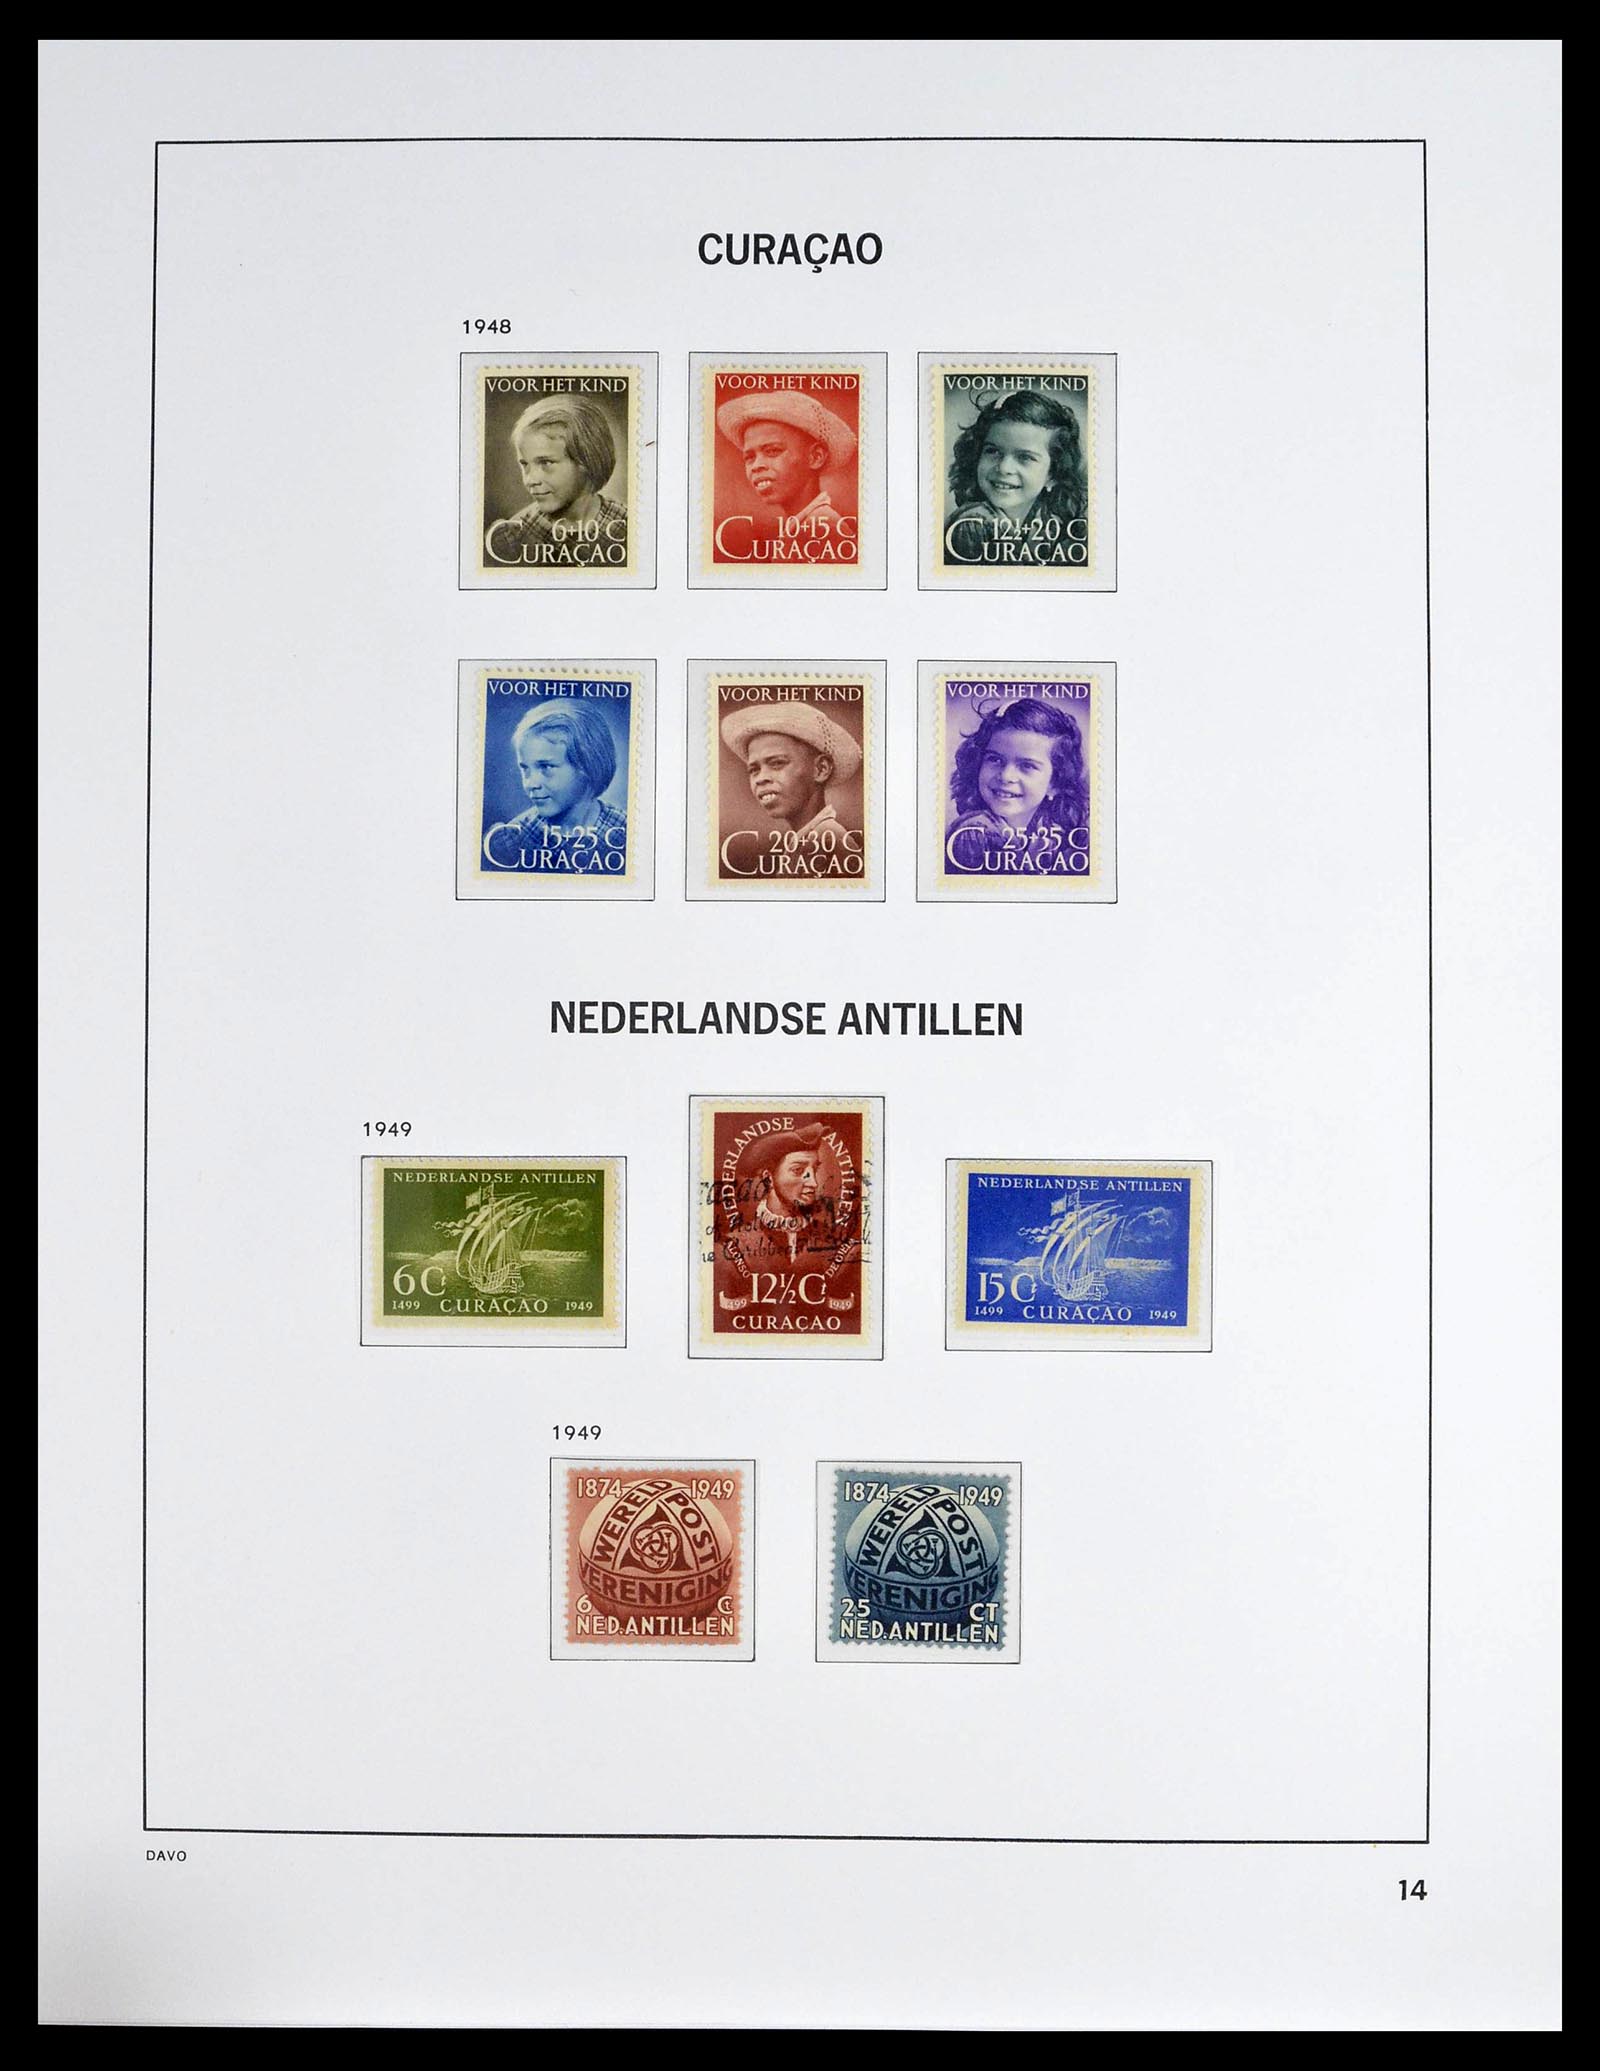 39360 0014 - Stamp collection 39360 Curaçao/Antilles complete 1873-2013.